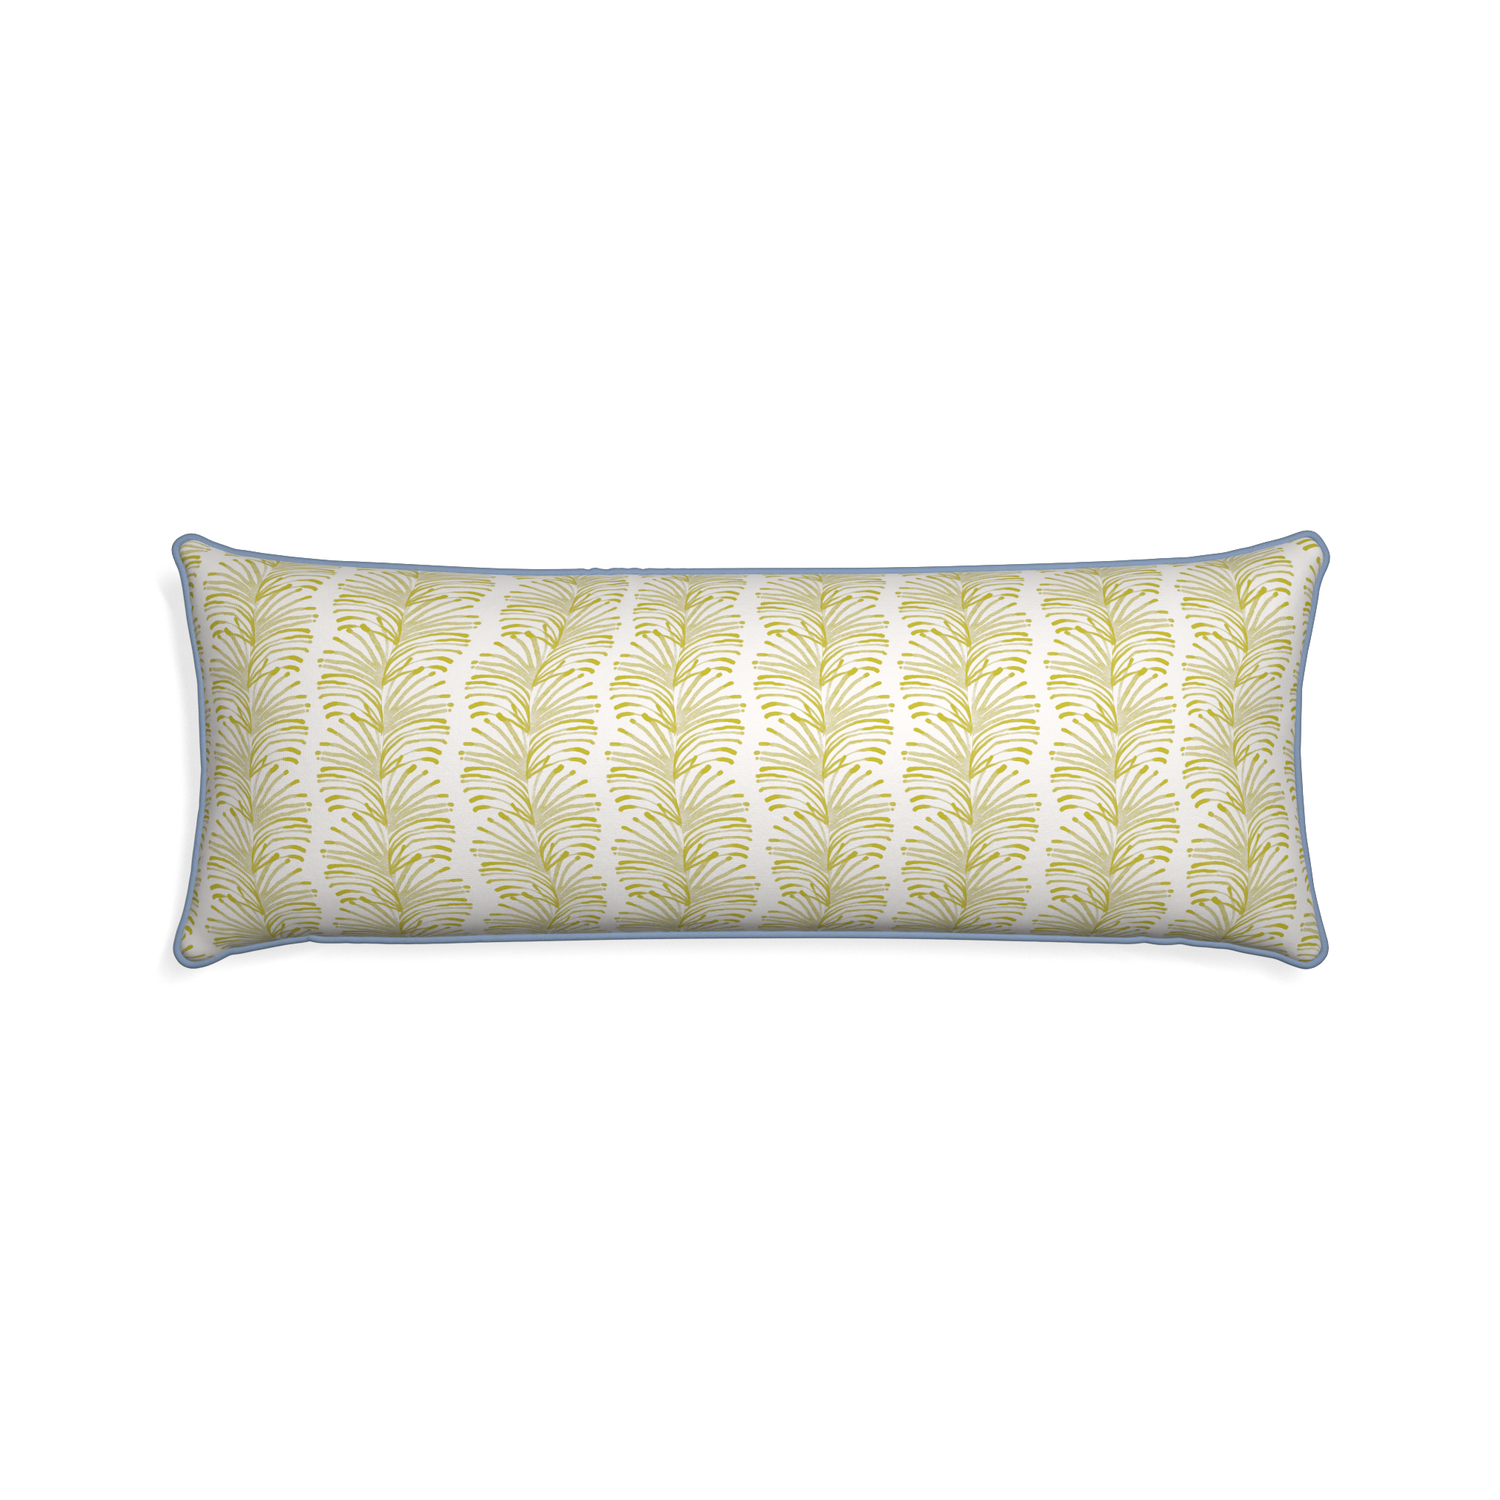 Xl-lumbar emma chartreuse custom yellow stripe chartreusepillow with sky piping on white background